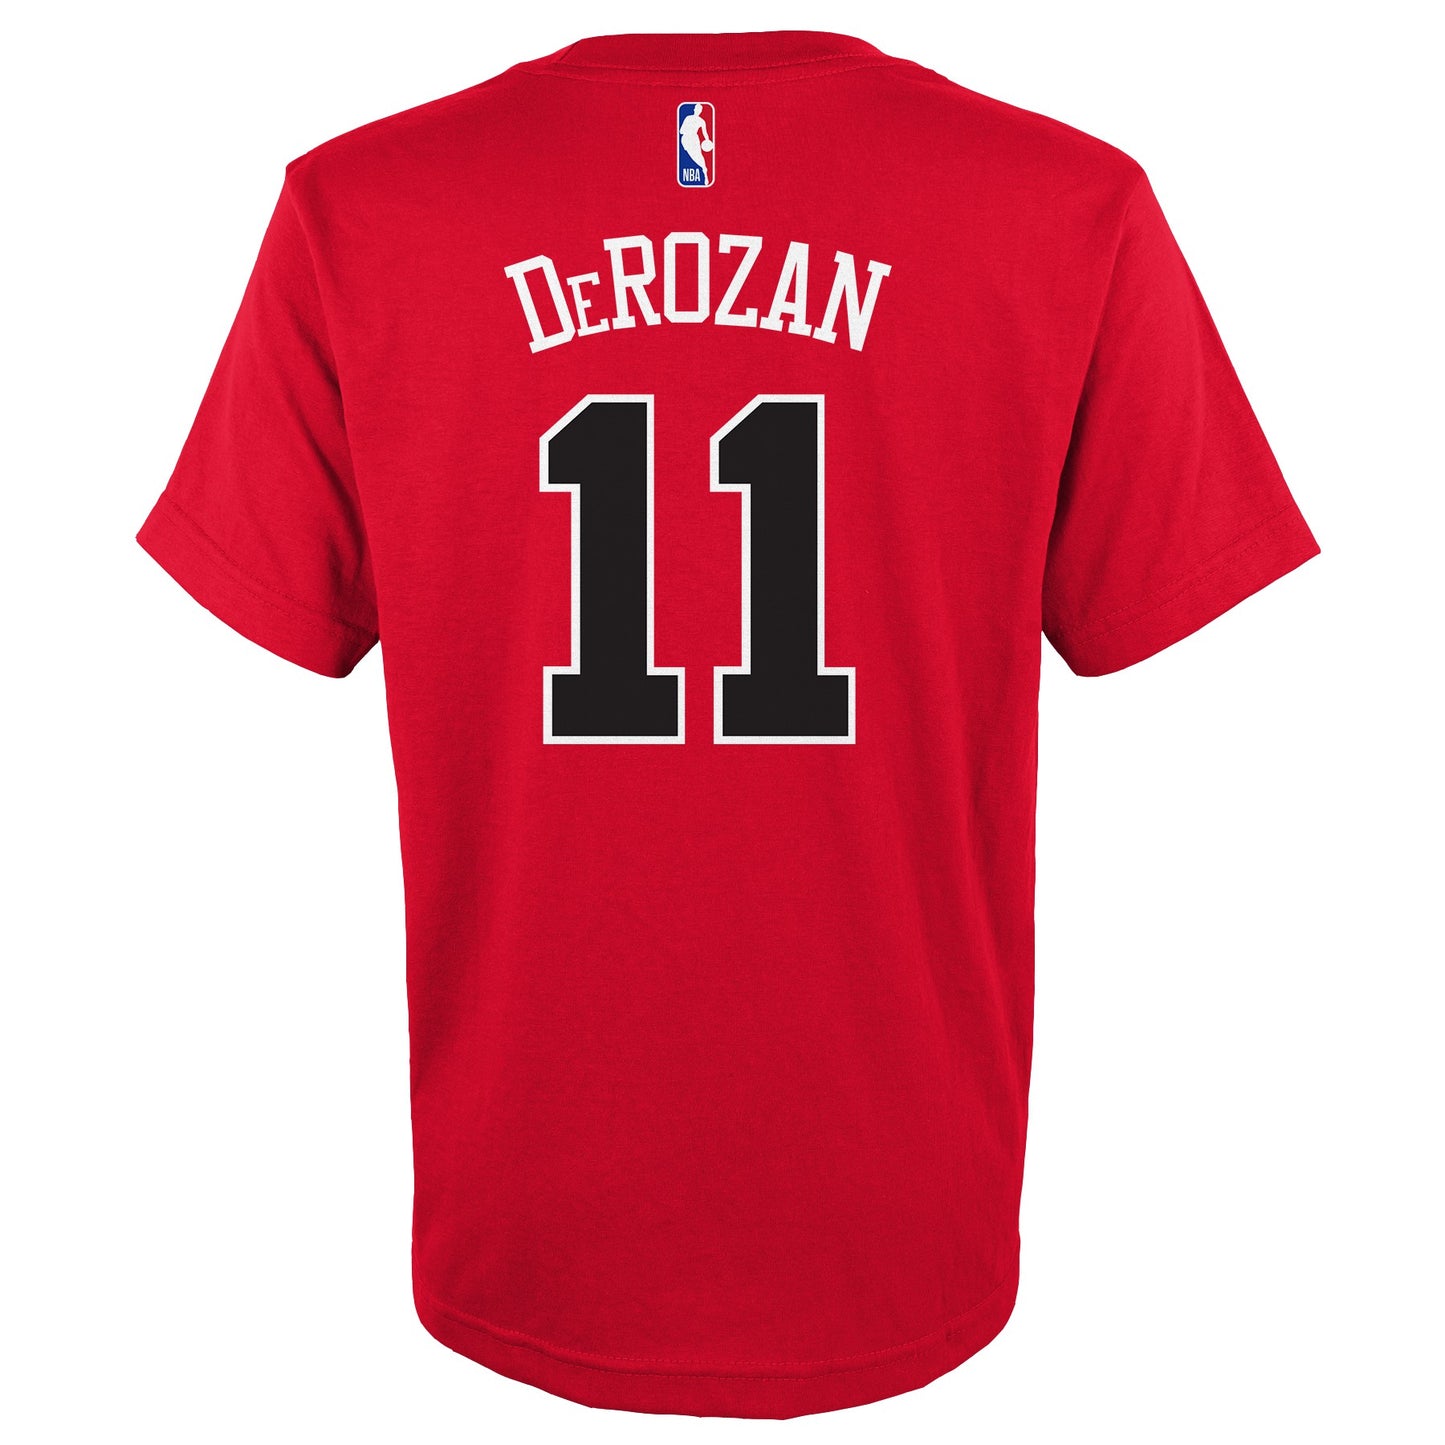 Youth Chicago Bulls Demar Derozan Red NBA Player Name And Number T-Shirt